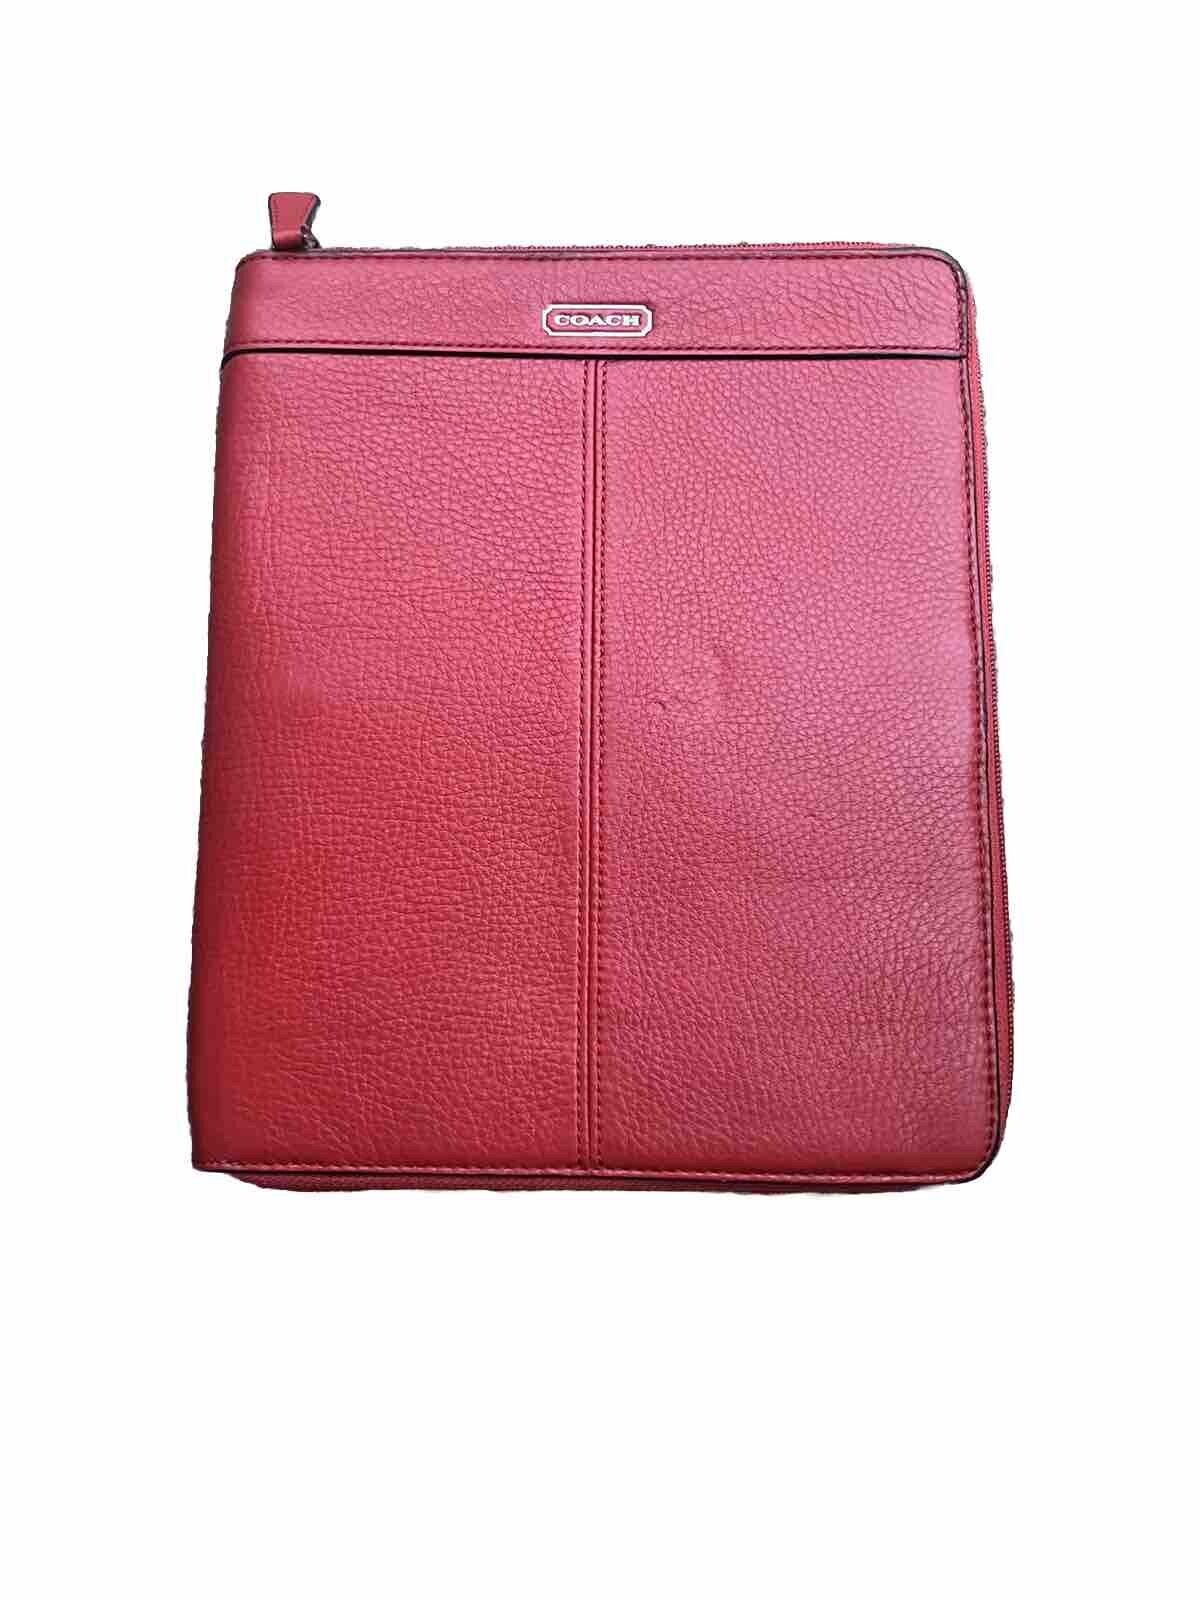 Coach Signature Kindle iPad Tablet Zip Around Cover Case Holder Red NWT